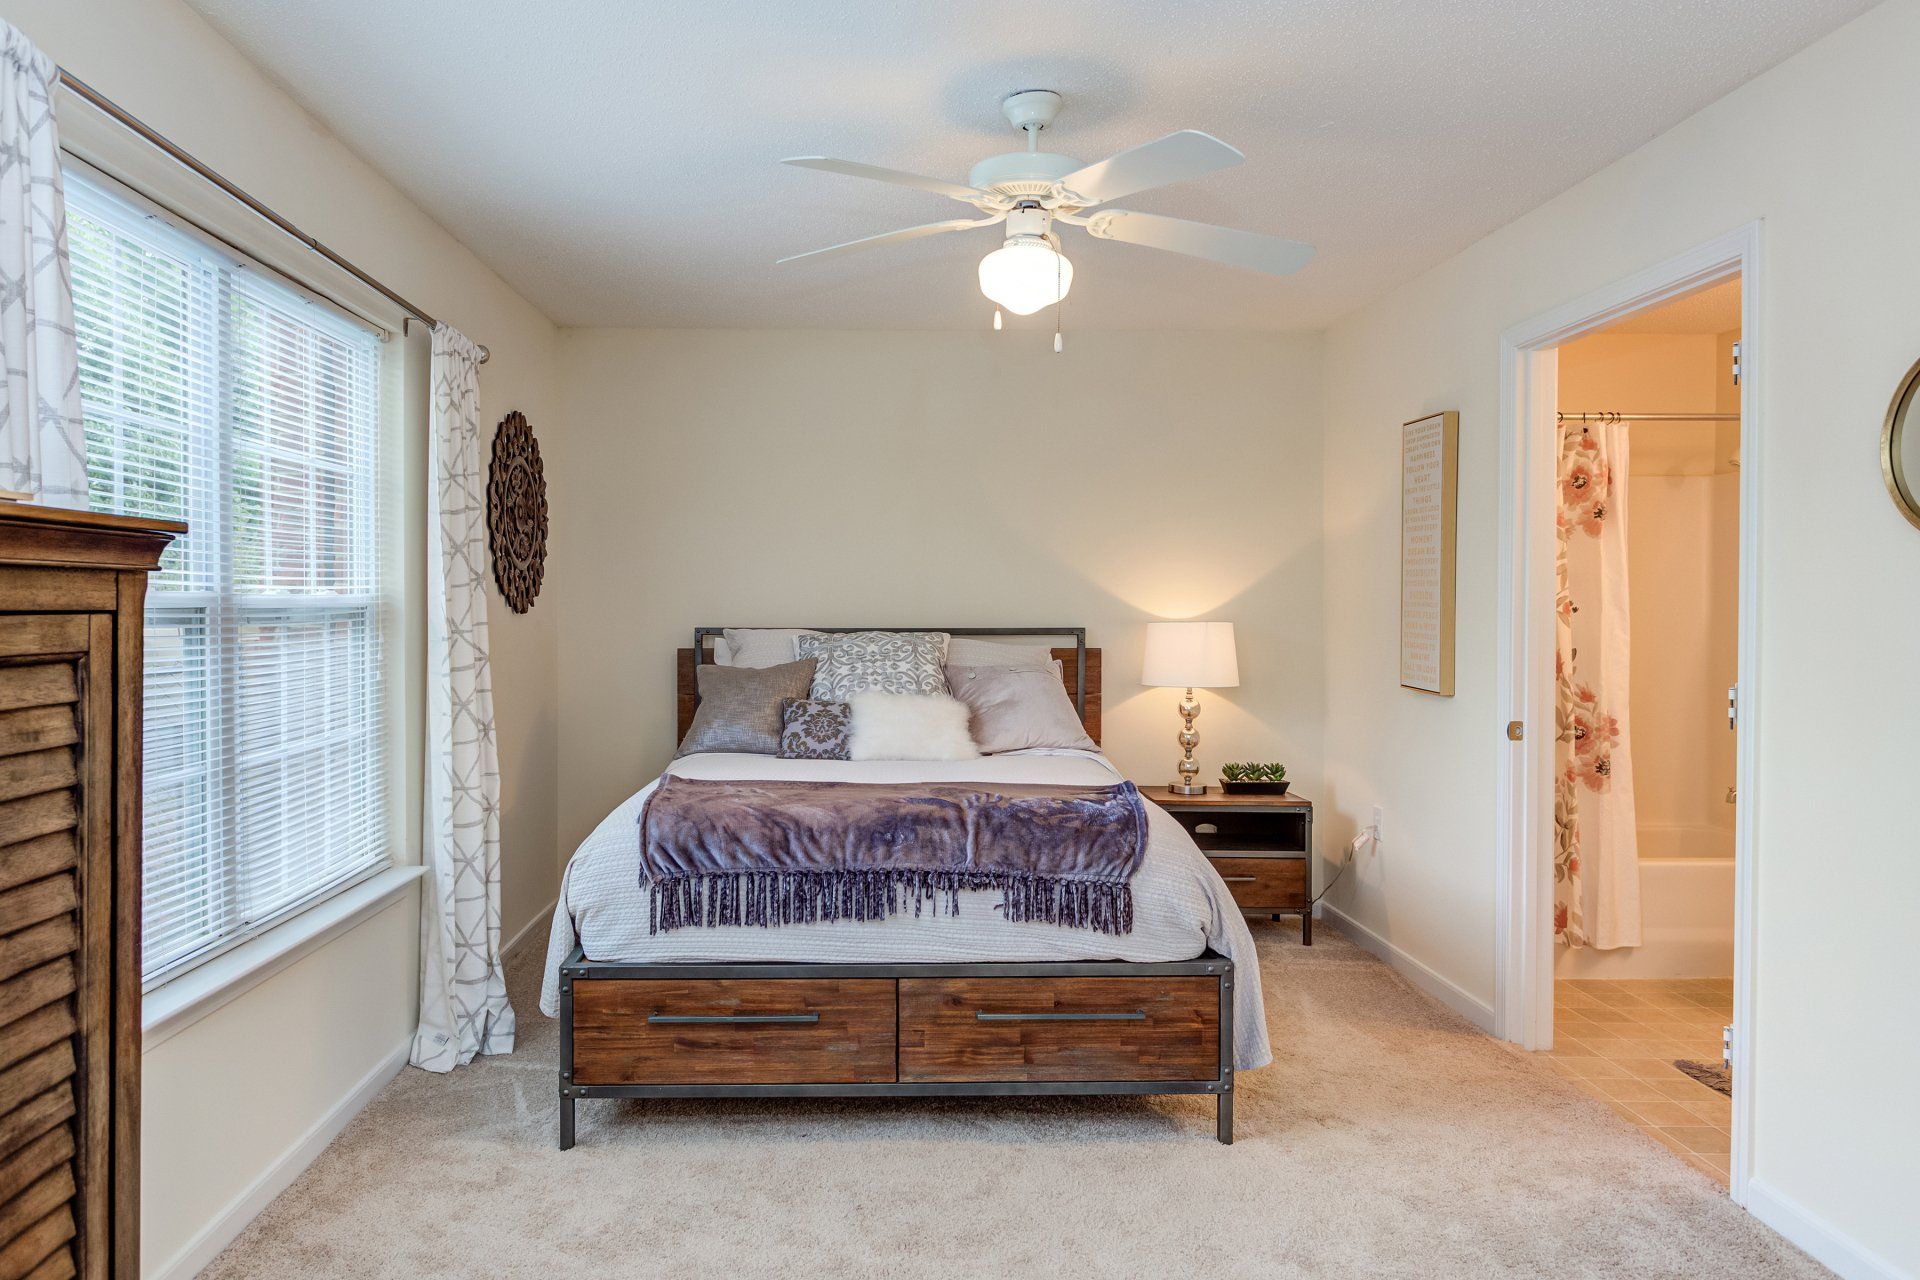 A bedroom with a bed and a ceiling fan at Morgan Ridge.